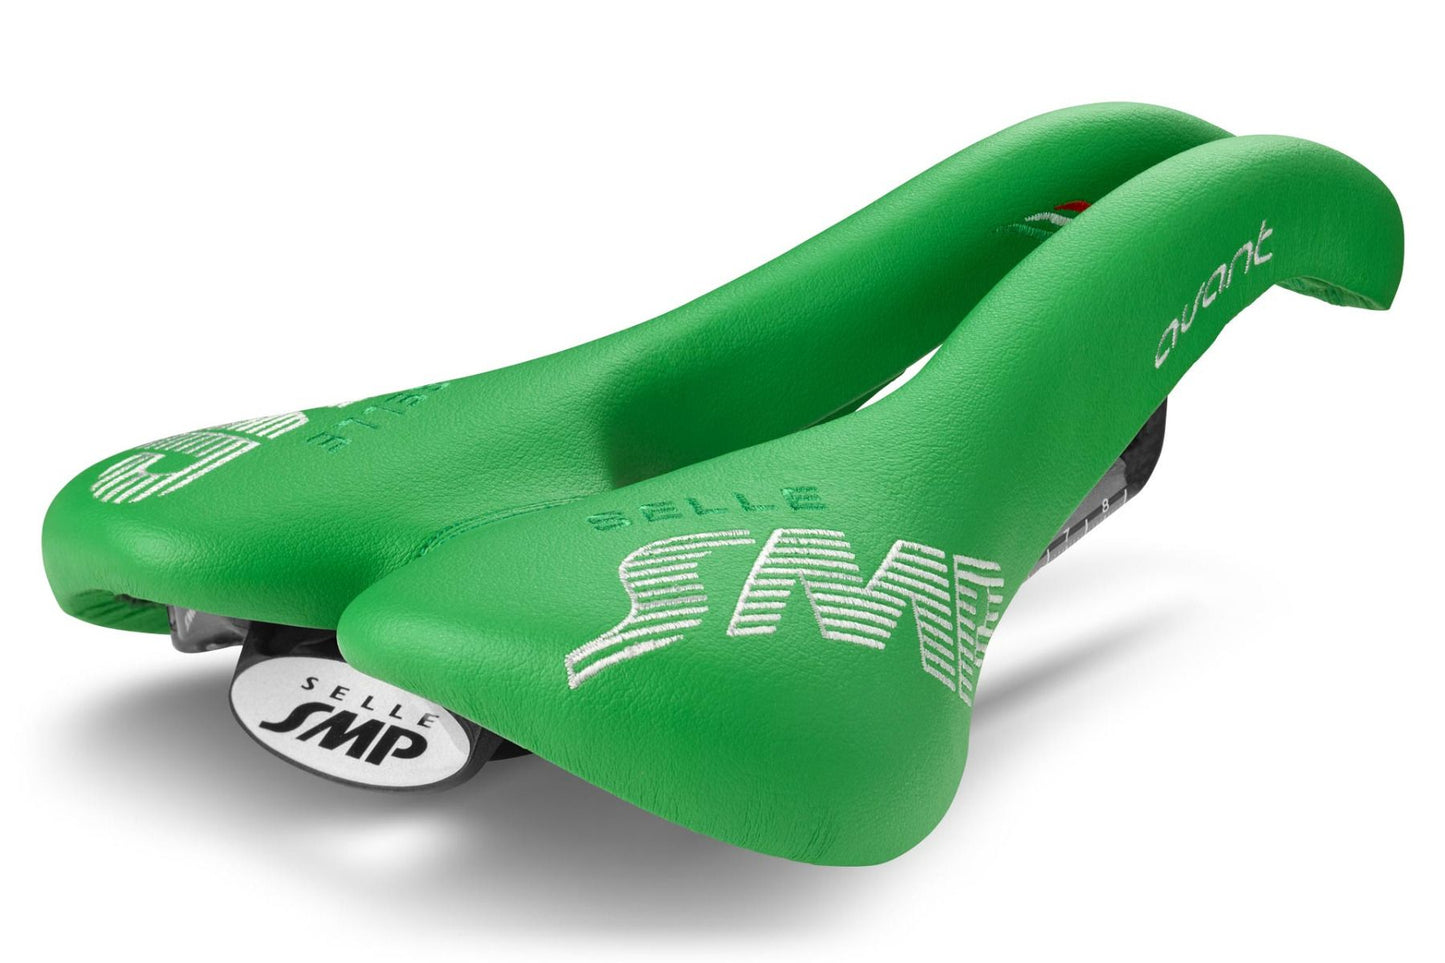 Selle SMP Avant Saddle with Carbon Rails (Green)